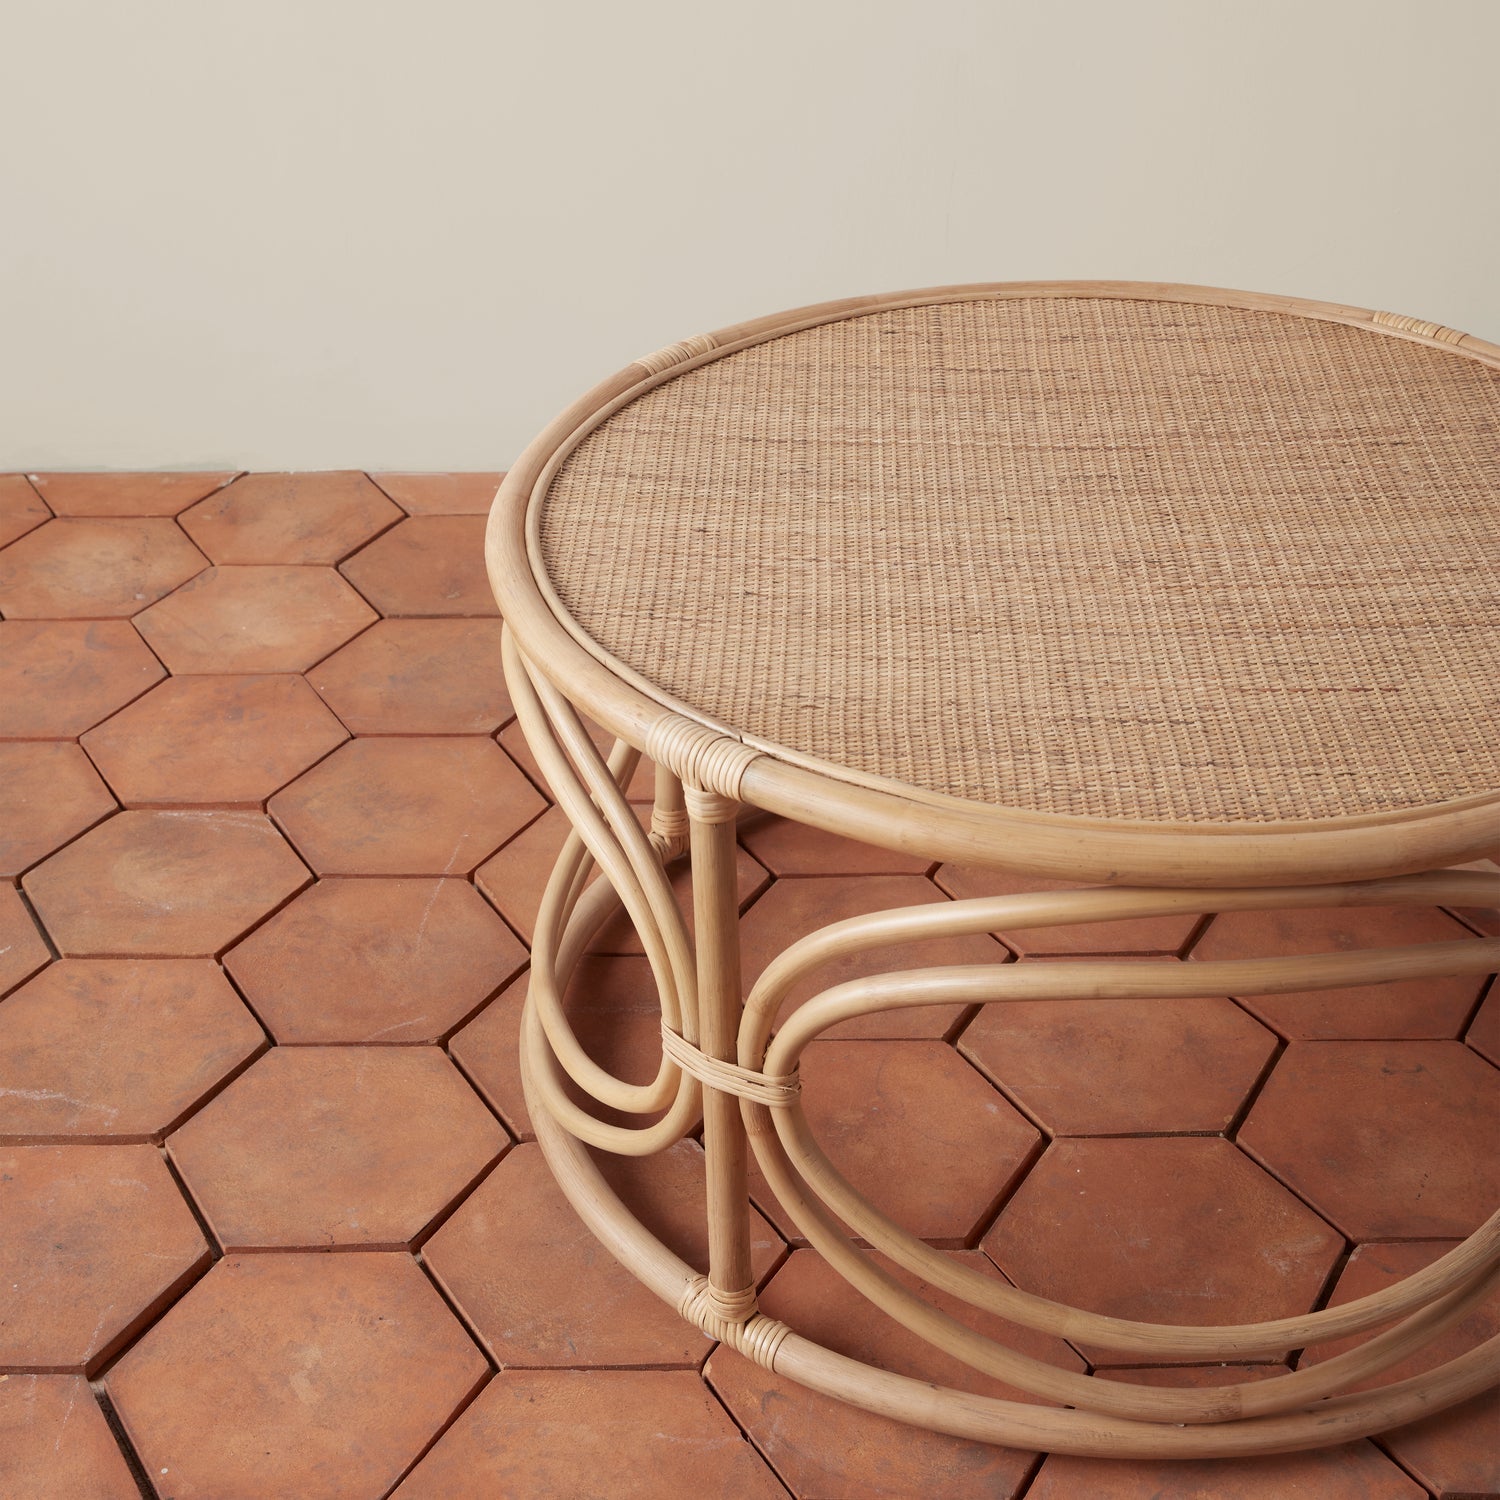 On a tan background is a round rattan coffee table with circle designs around the edge of the table.